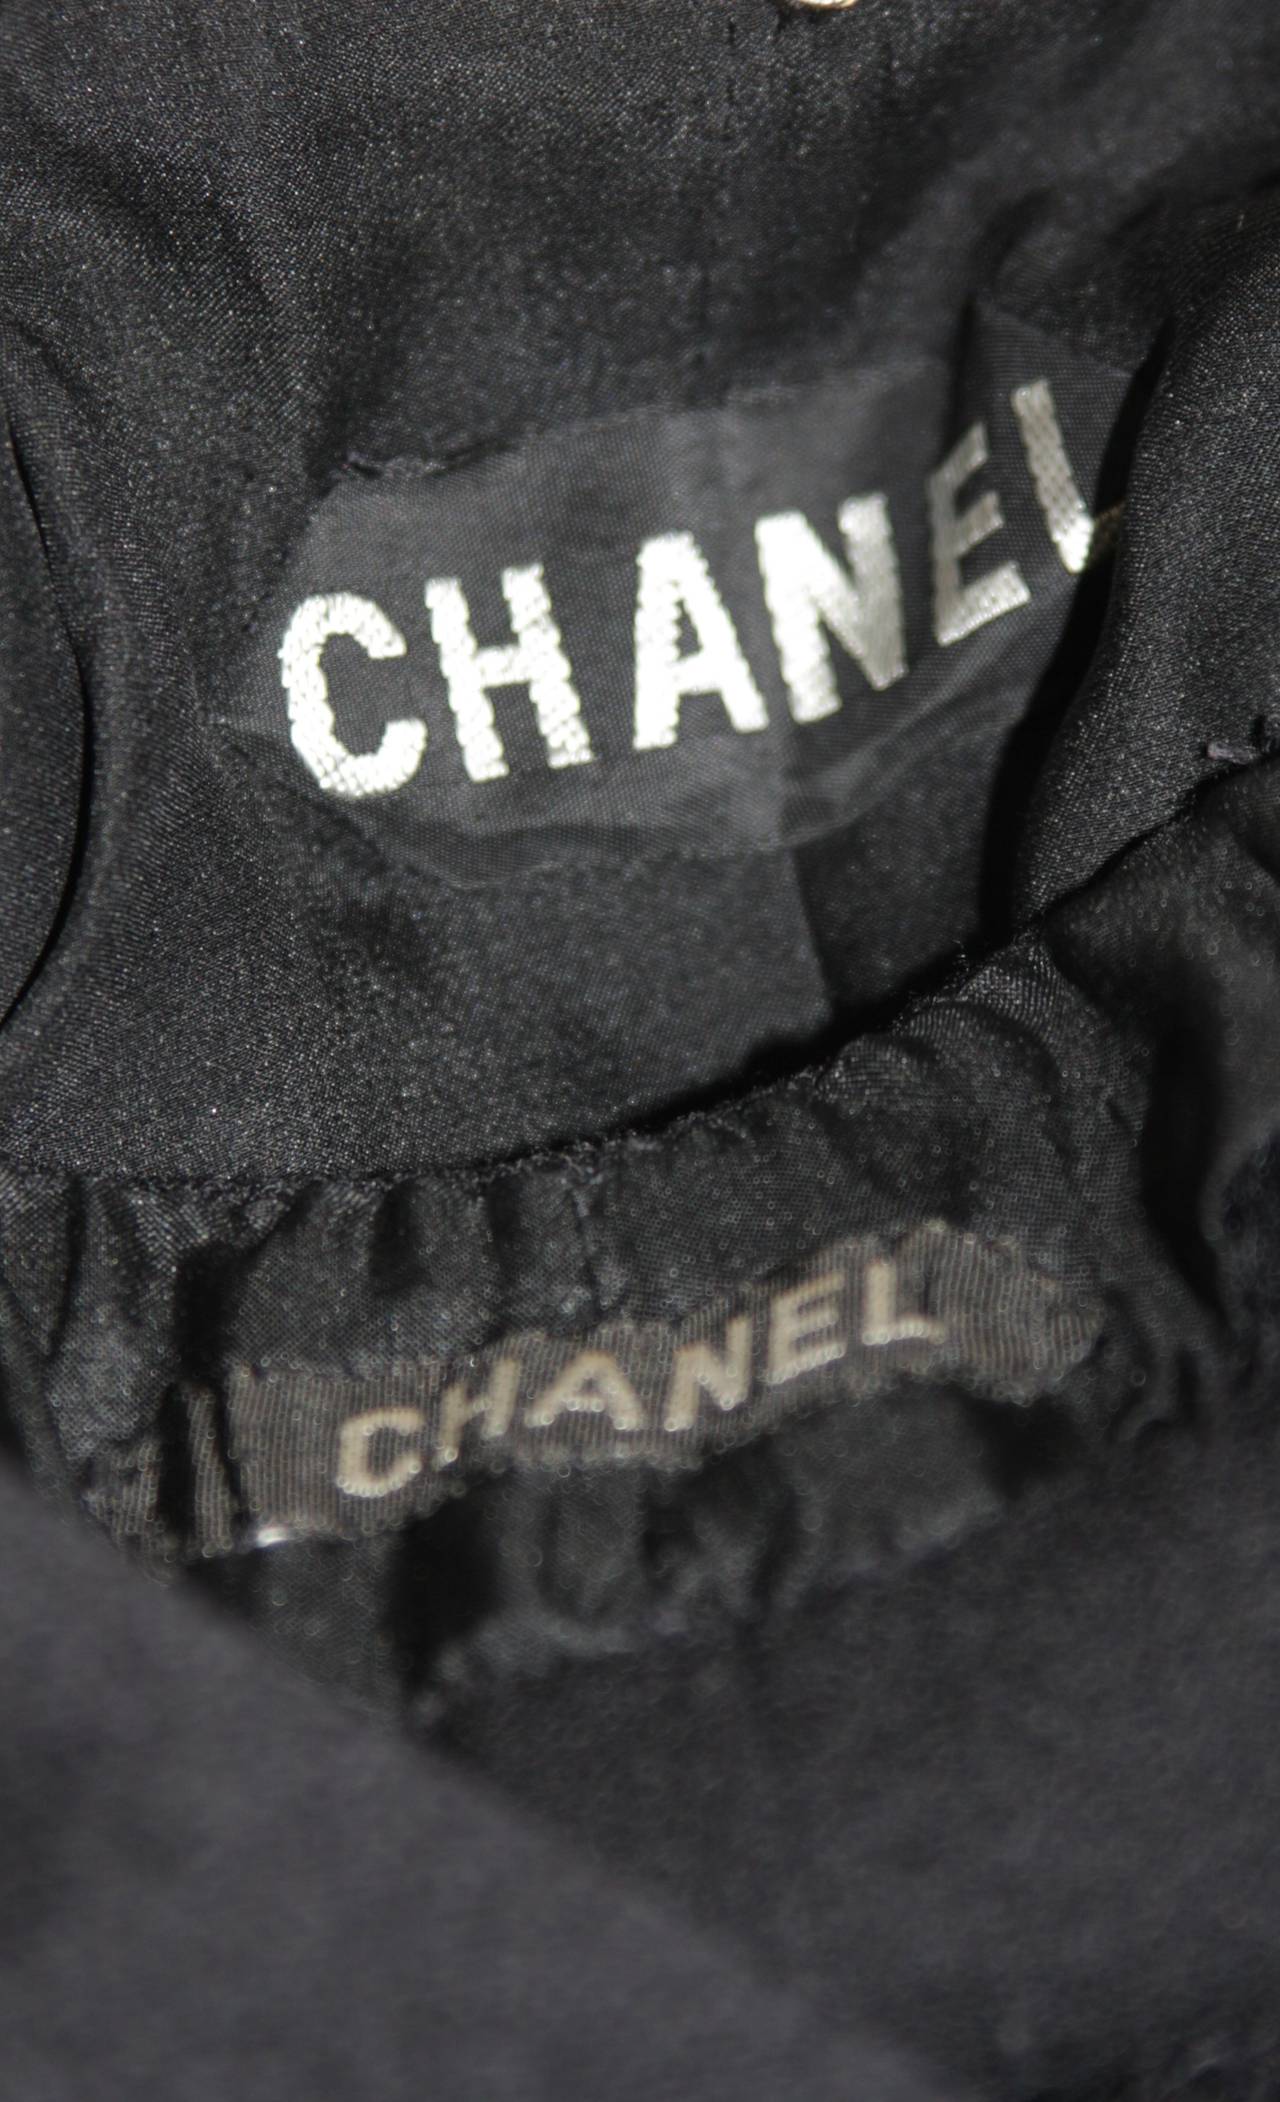 Chanel Haute Couture Black Wool Sailor Inspired Suit Size 2-4 EU 34-36 4